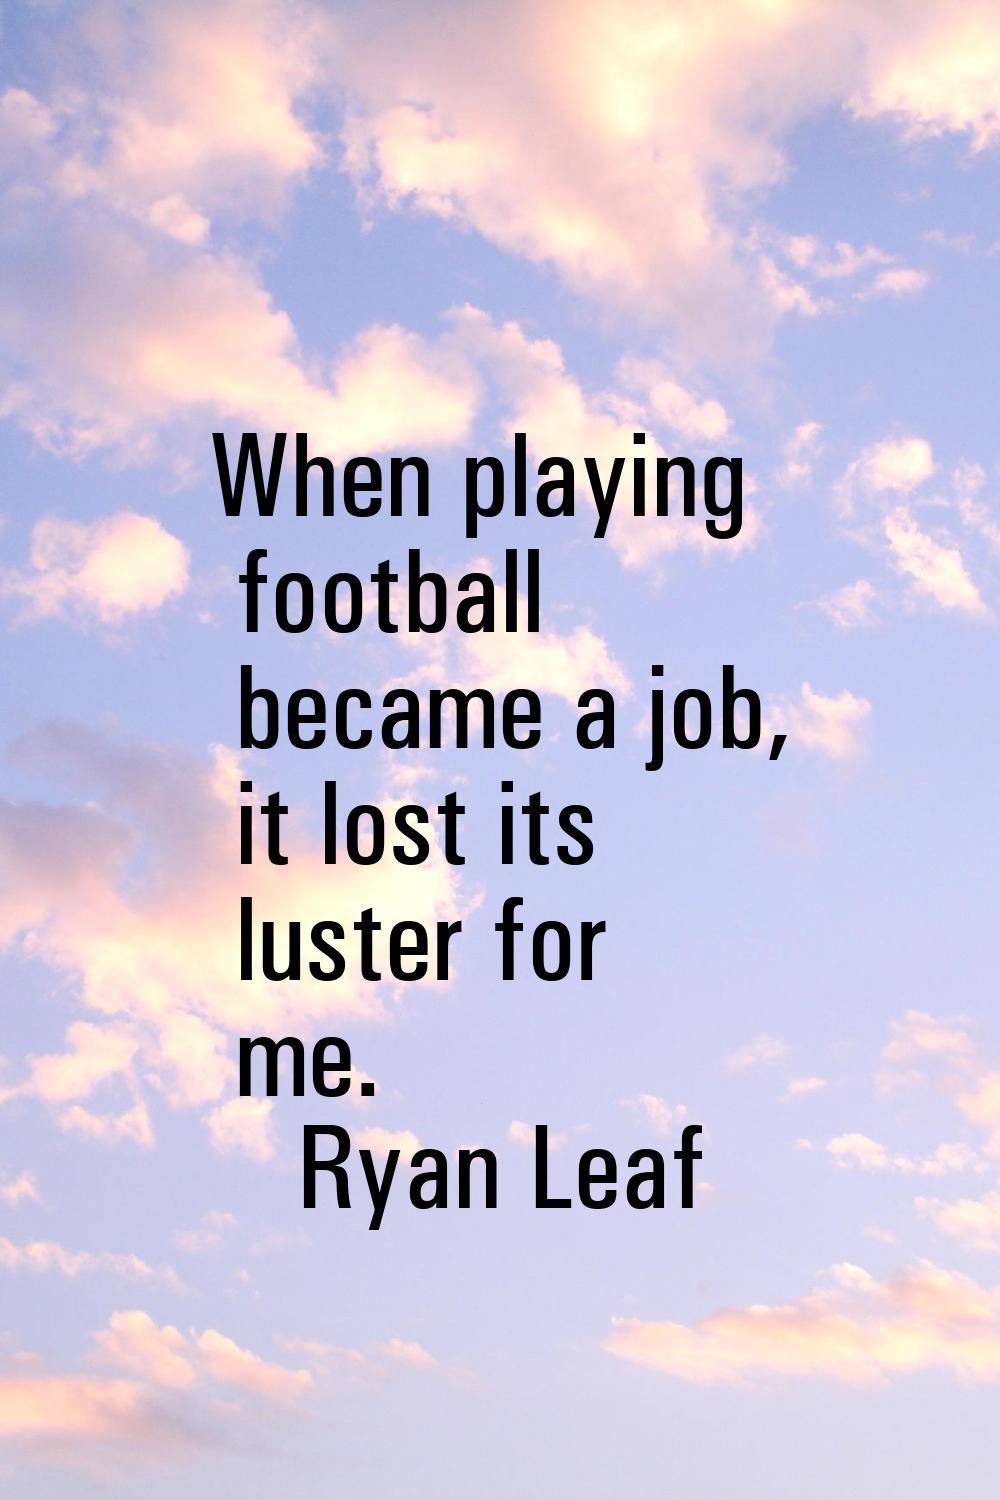 When playing football became a job, it lost its luster for me.